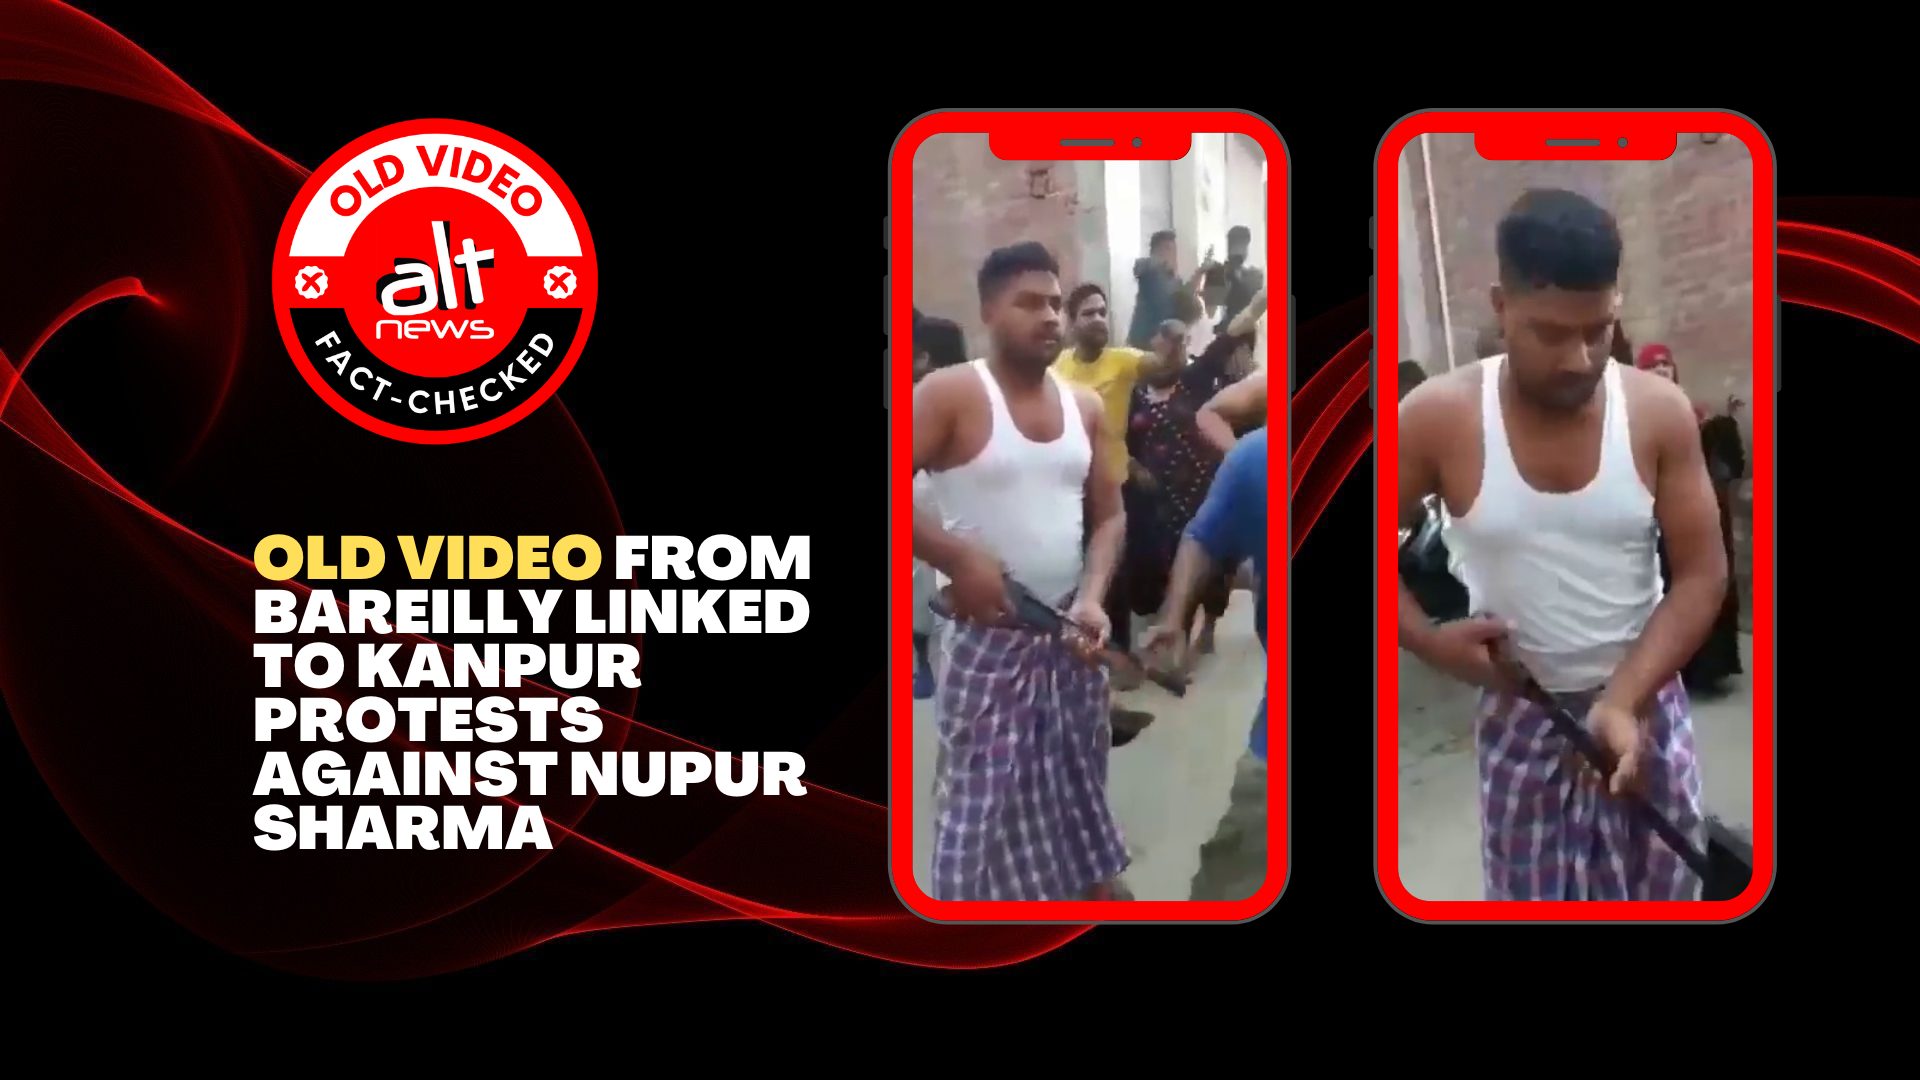 Old, unrelated video falsely linked to Kanpur protests against Nupur Sharma's remark - Alt News